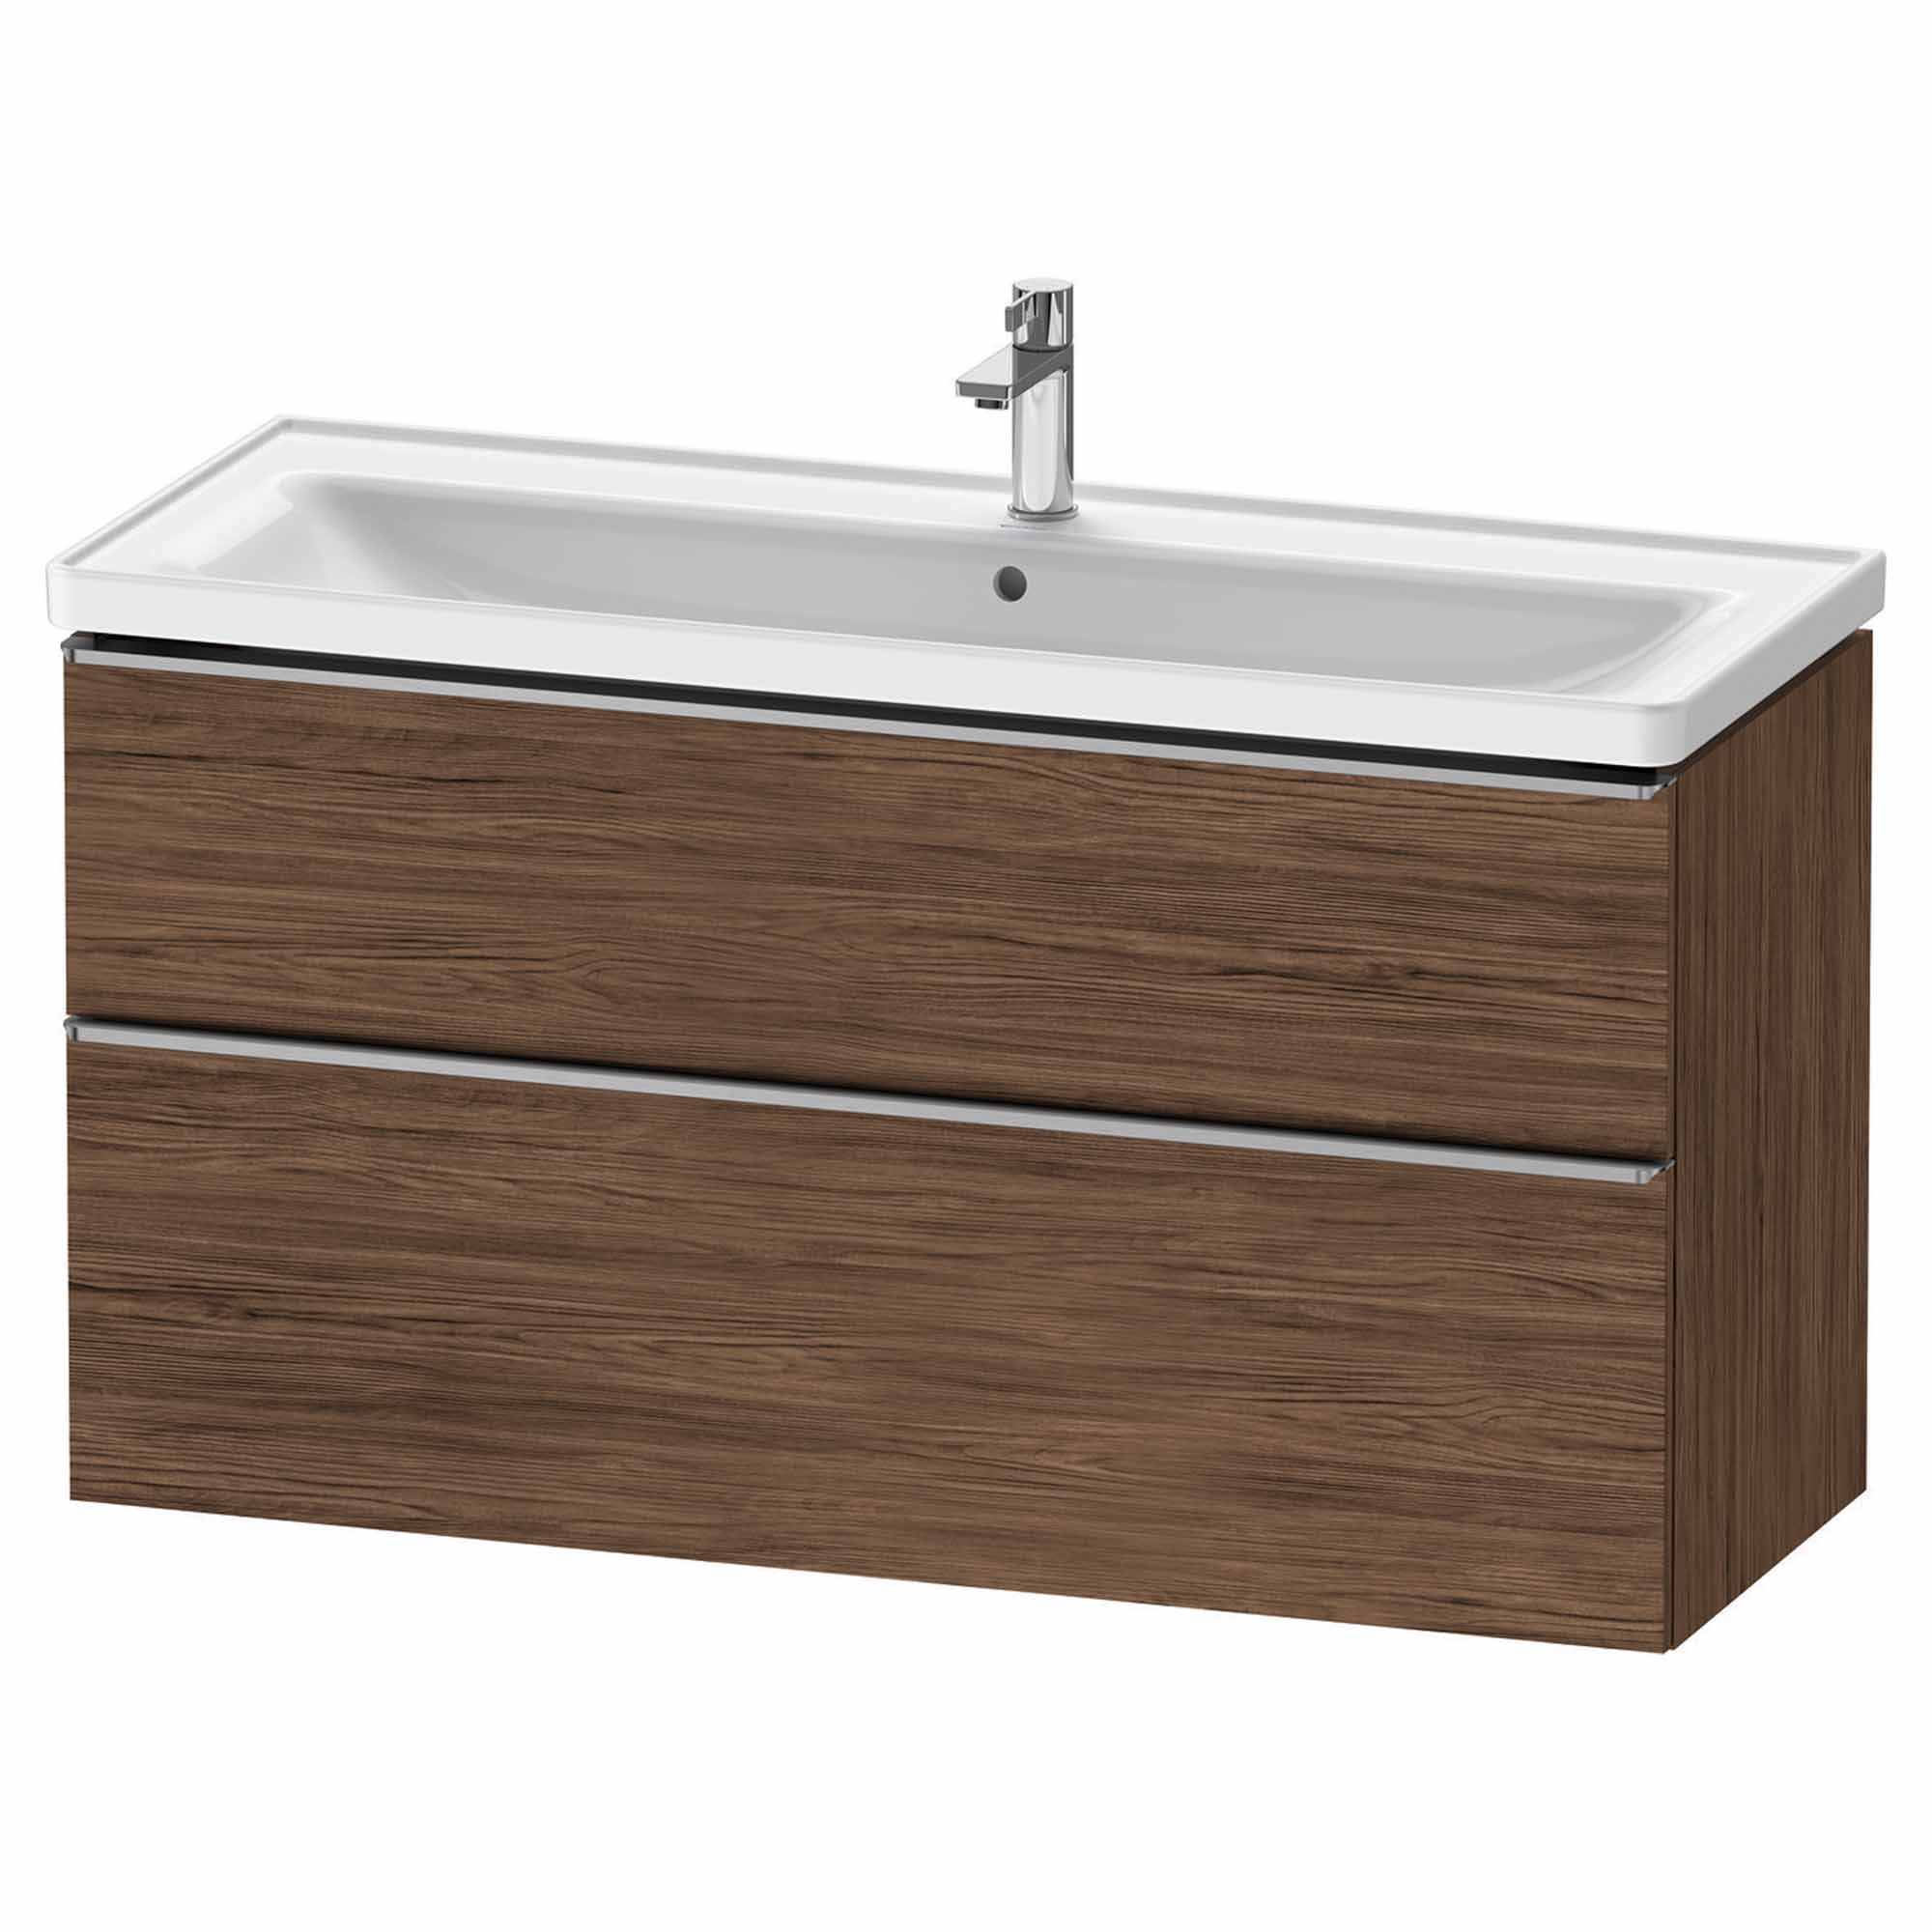 duravit d-neo 1200mm wall mounted vanity unit with d-neo basin dark walnut stainless steel handles